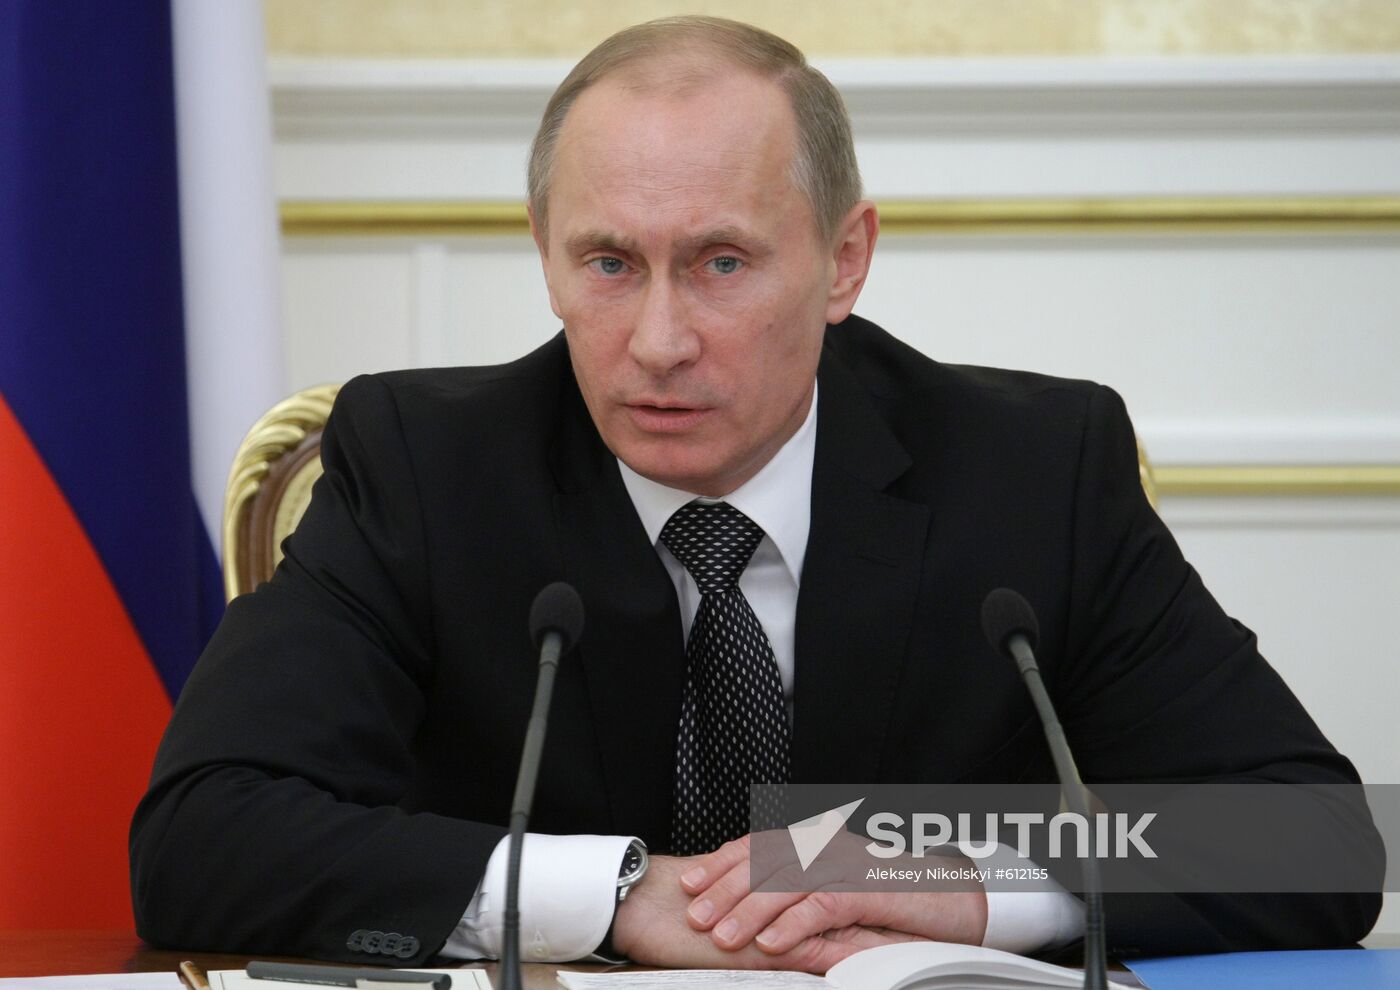 Vladimir Putin chairs meeting in Government House